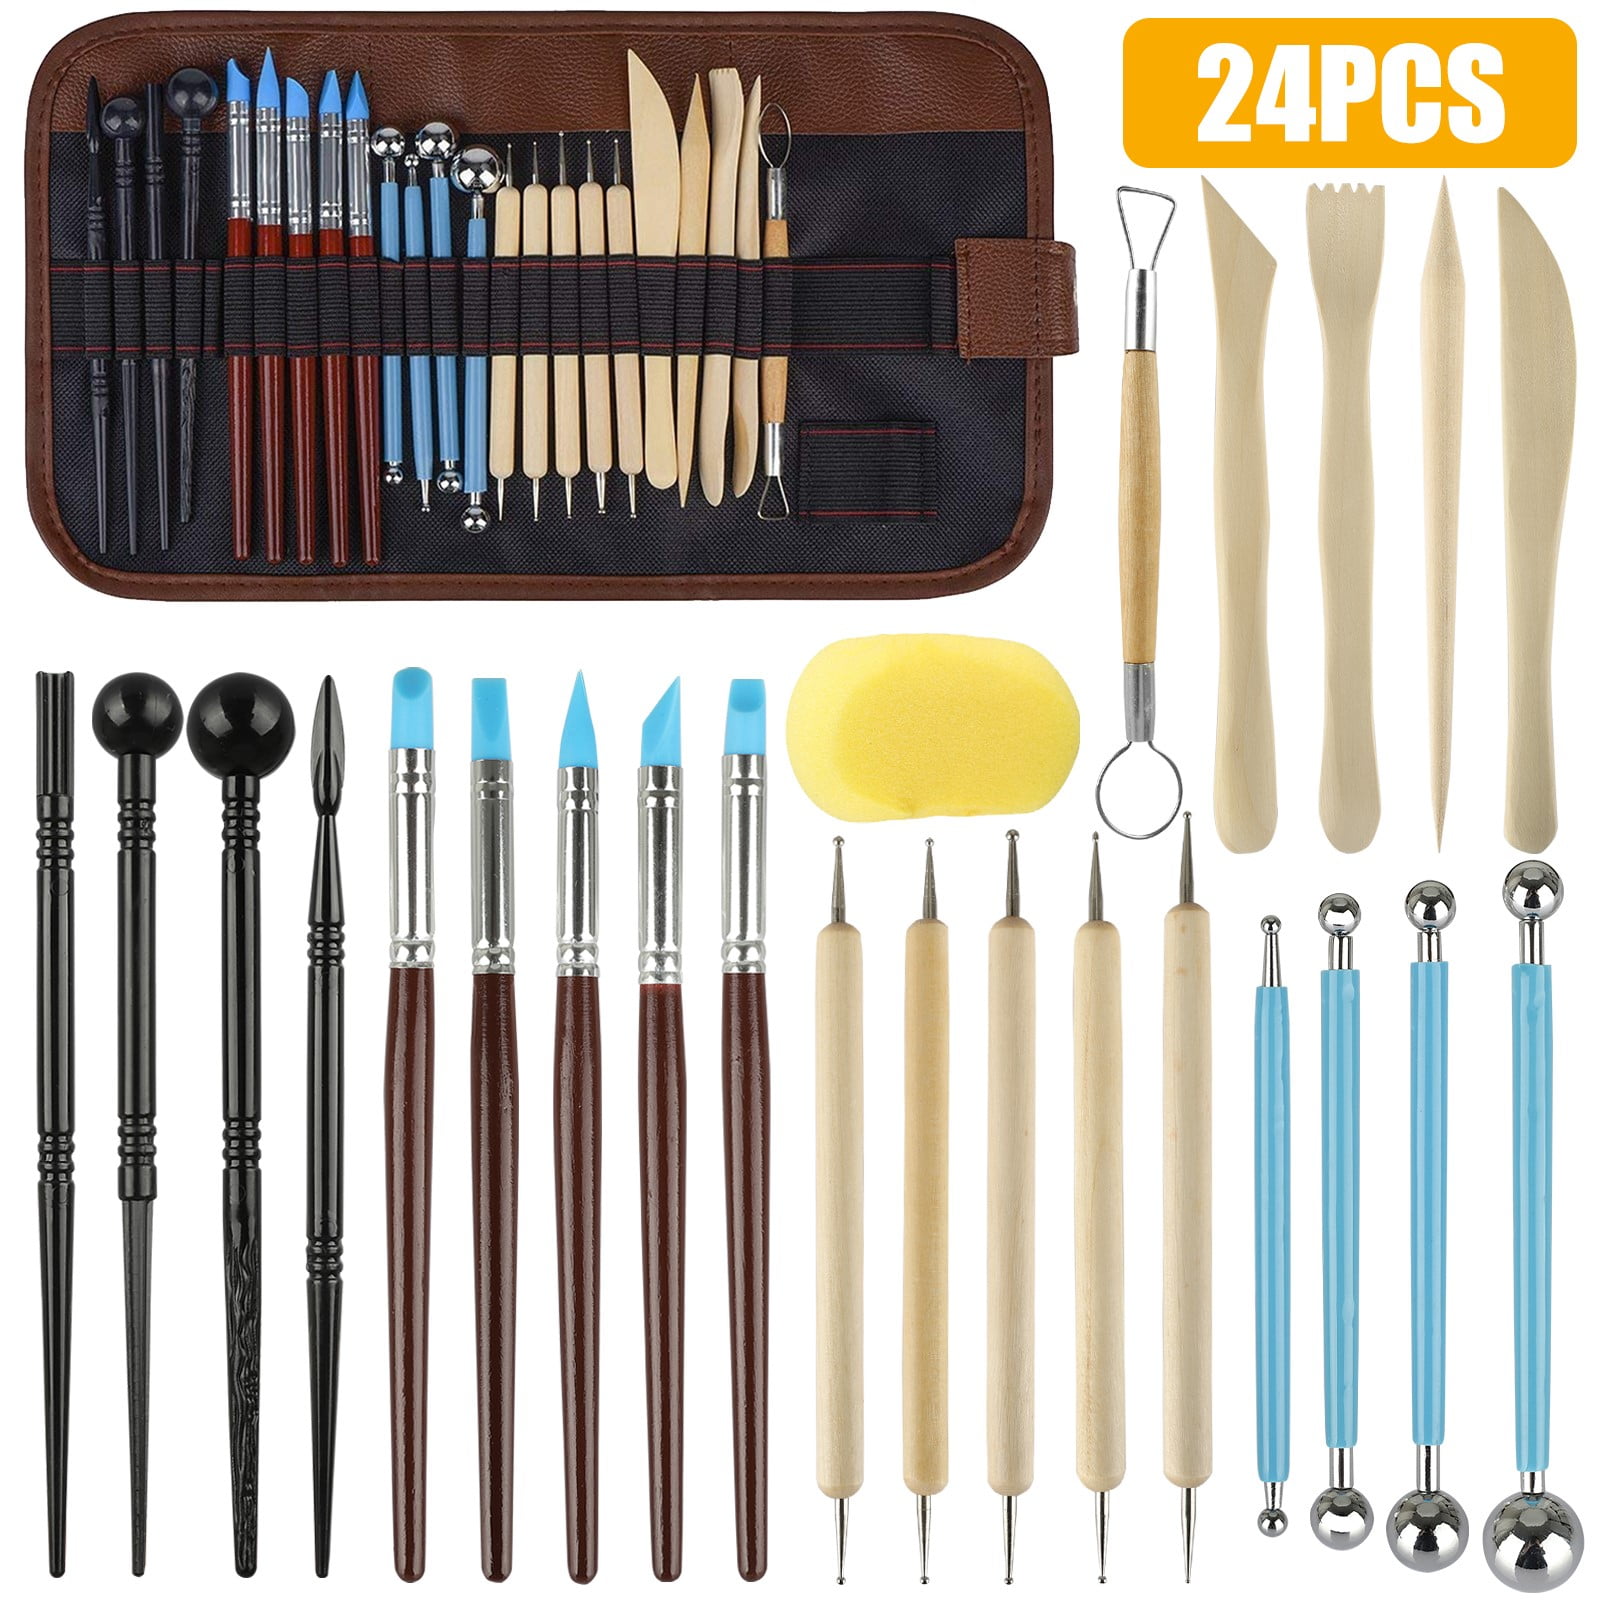 NEW Metal Pottery Clay Wax Sculpting Polymer Modeling Carving Kits Accessories 